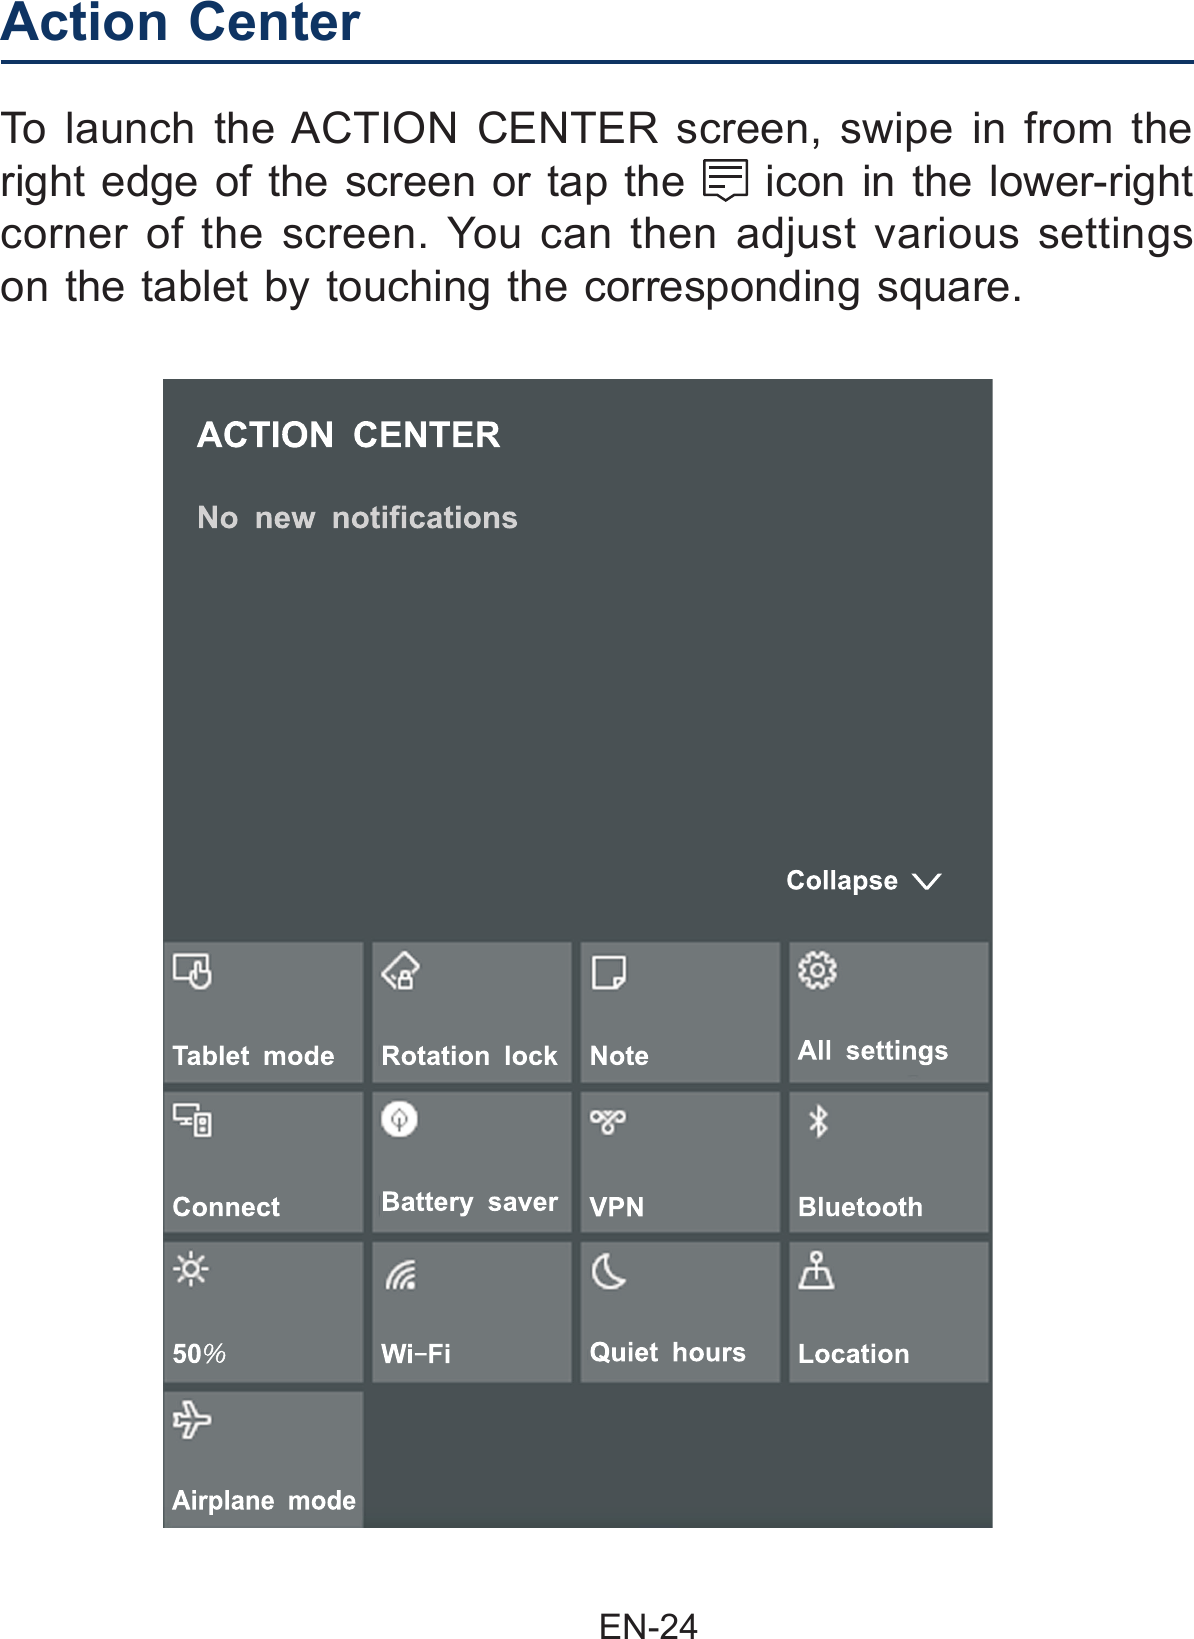                                                EN-24 Action Center  To launch the ACTION CENTER screen, swipe in from the right edge of the screen or tap the   icon in the lower-right corner of the screen. You can then adjust various settings on the tablet by touching the corresponding square.